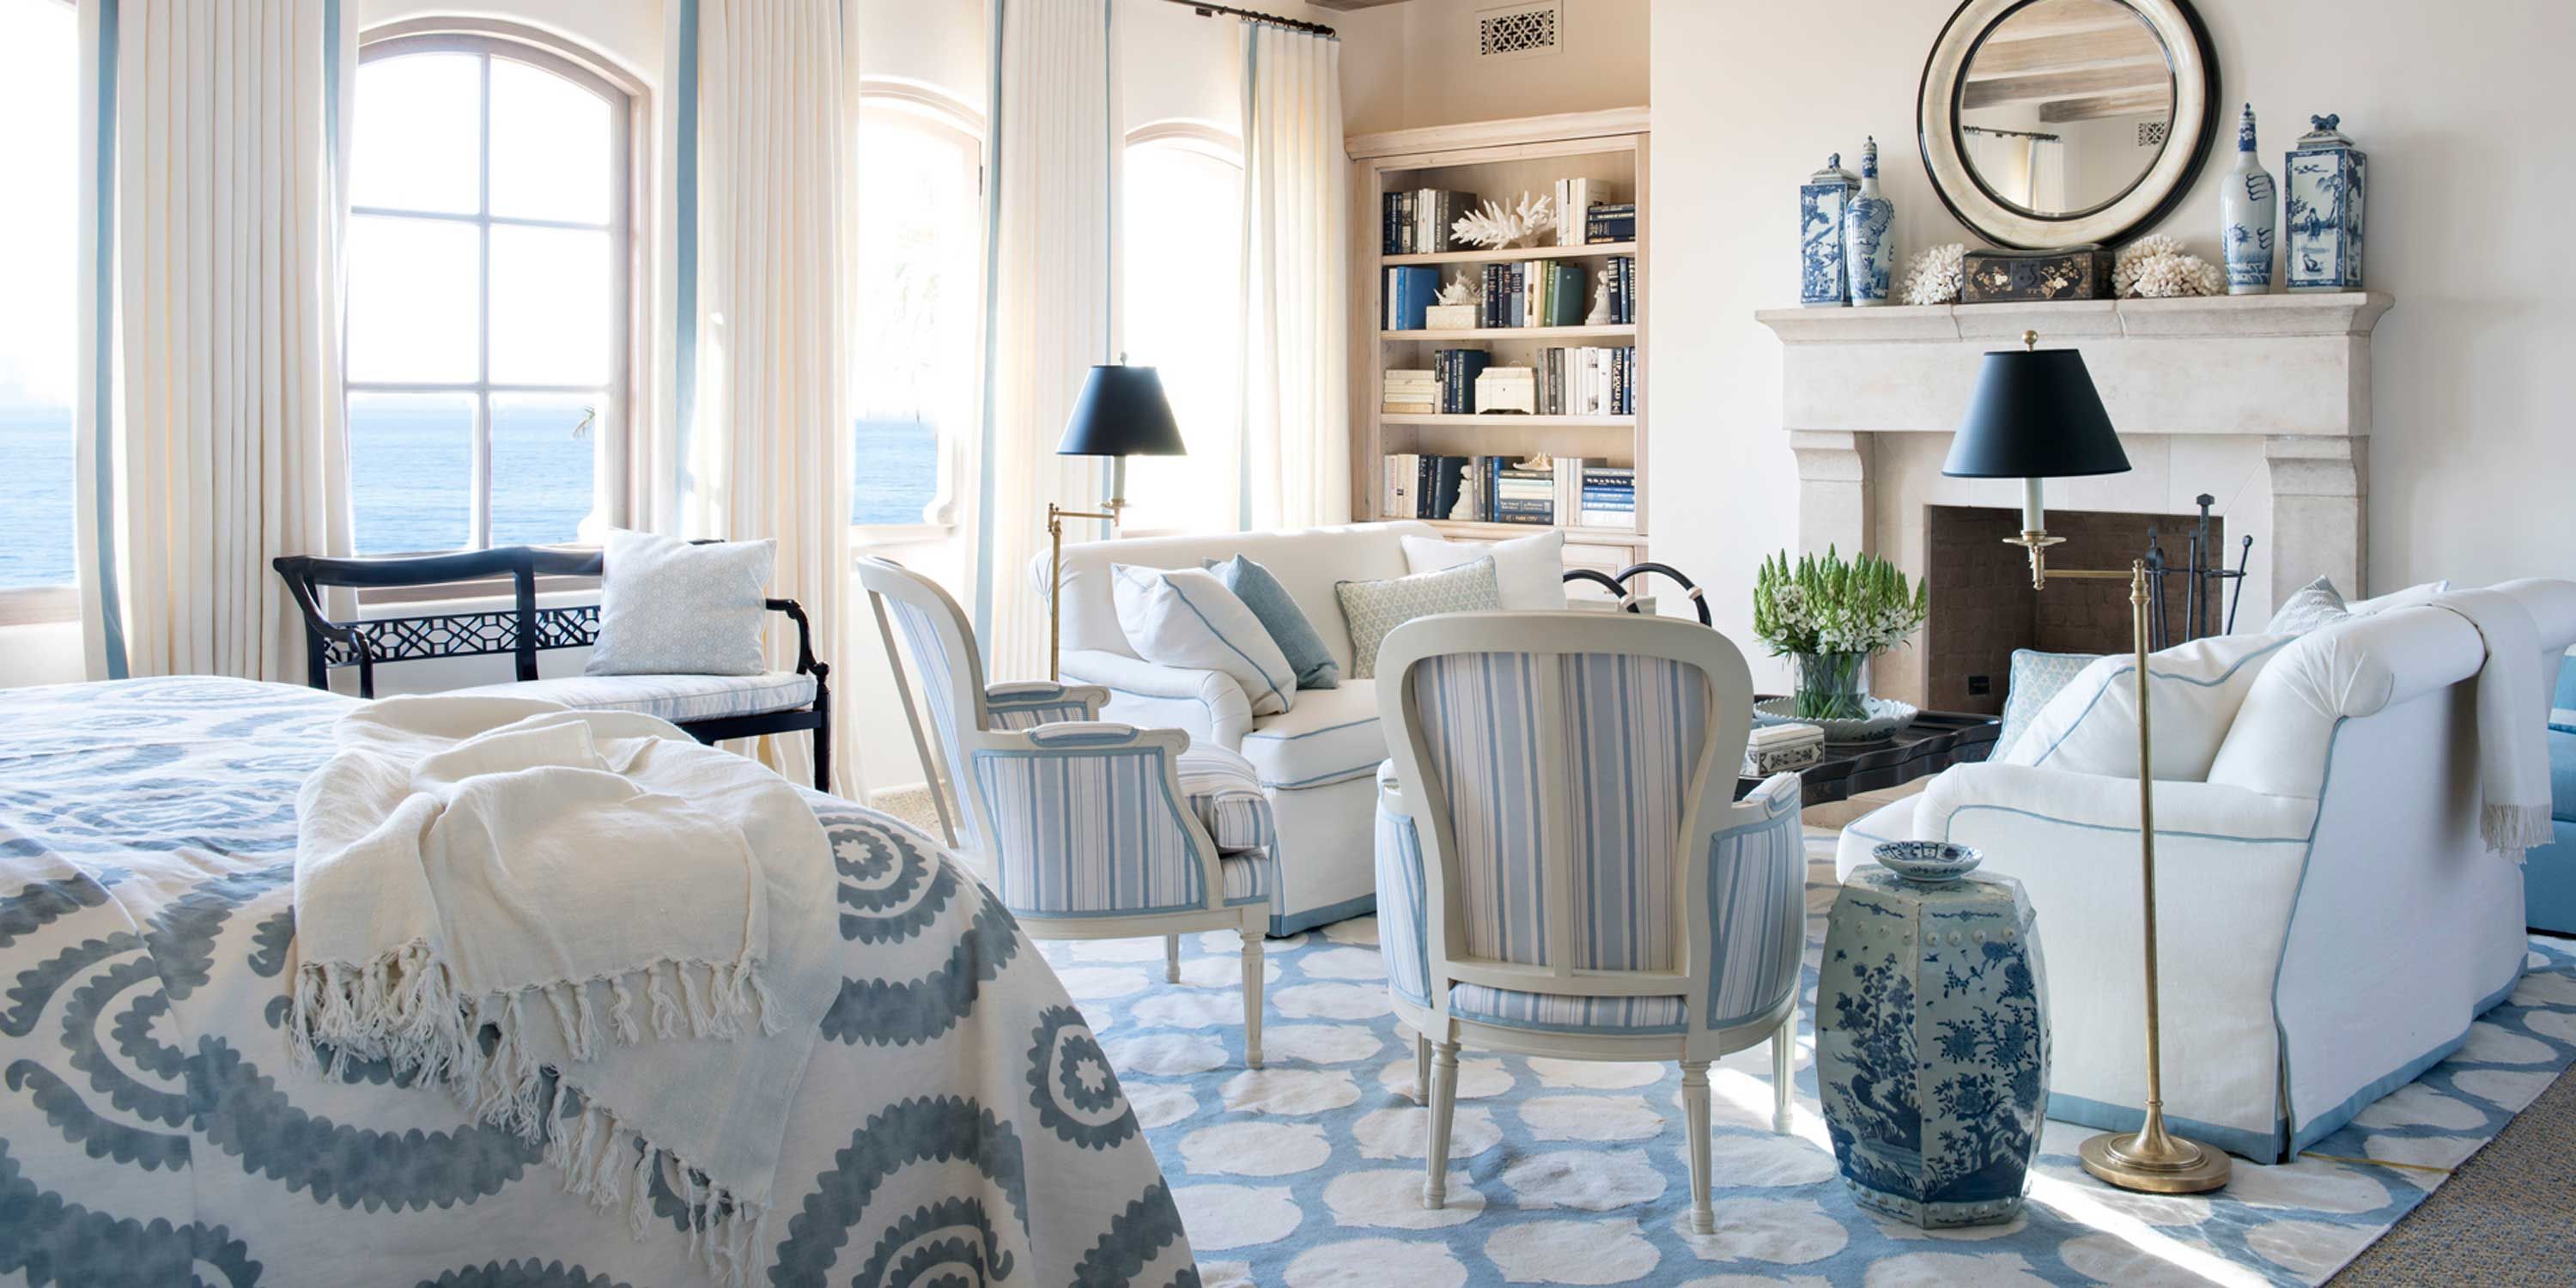 Blue And White Rooms Decorating With, Blue And White Living Room